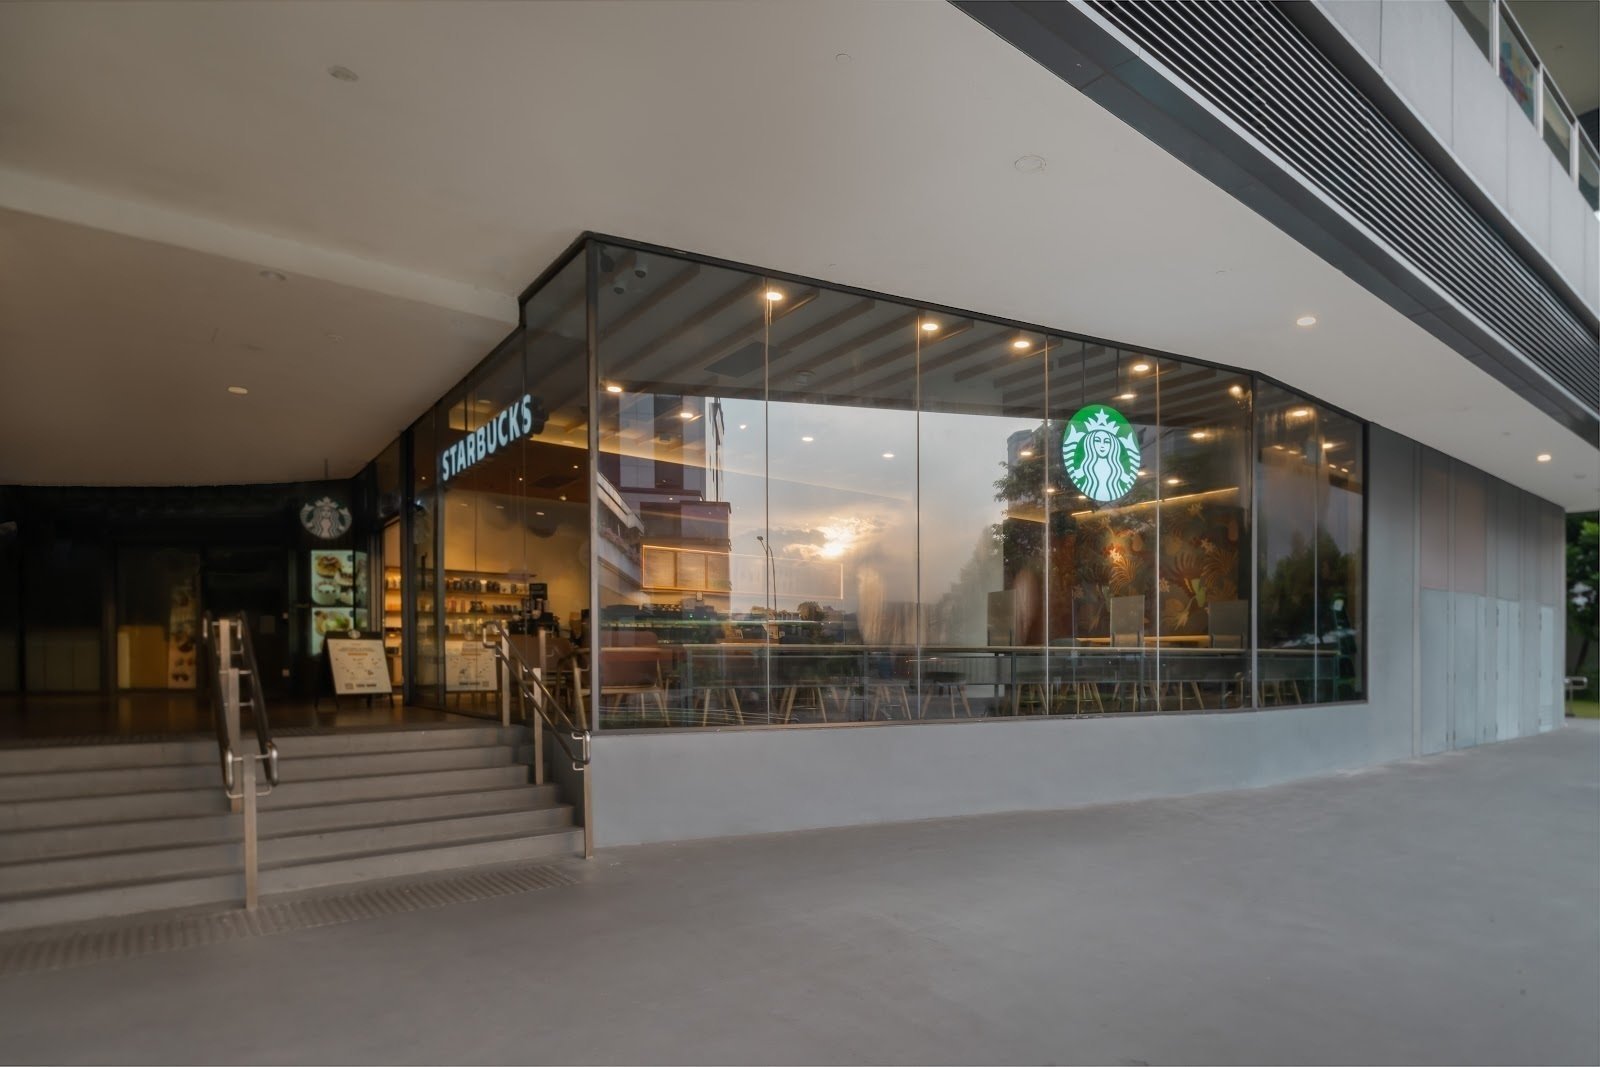 <span class="translation_missing" title="translation missing: en.meta.location_title, location_name: Starbucks @ 1 Tampines Walk, city: Singapore">Location Title</span>